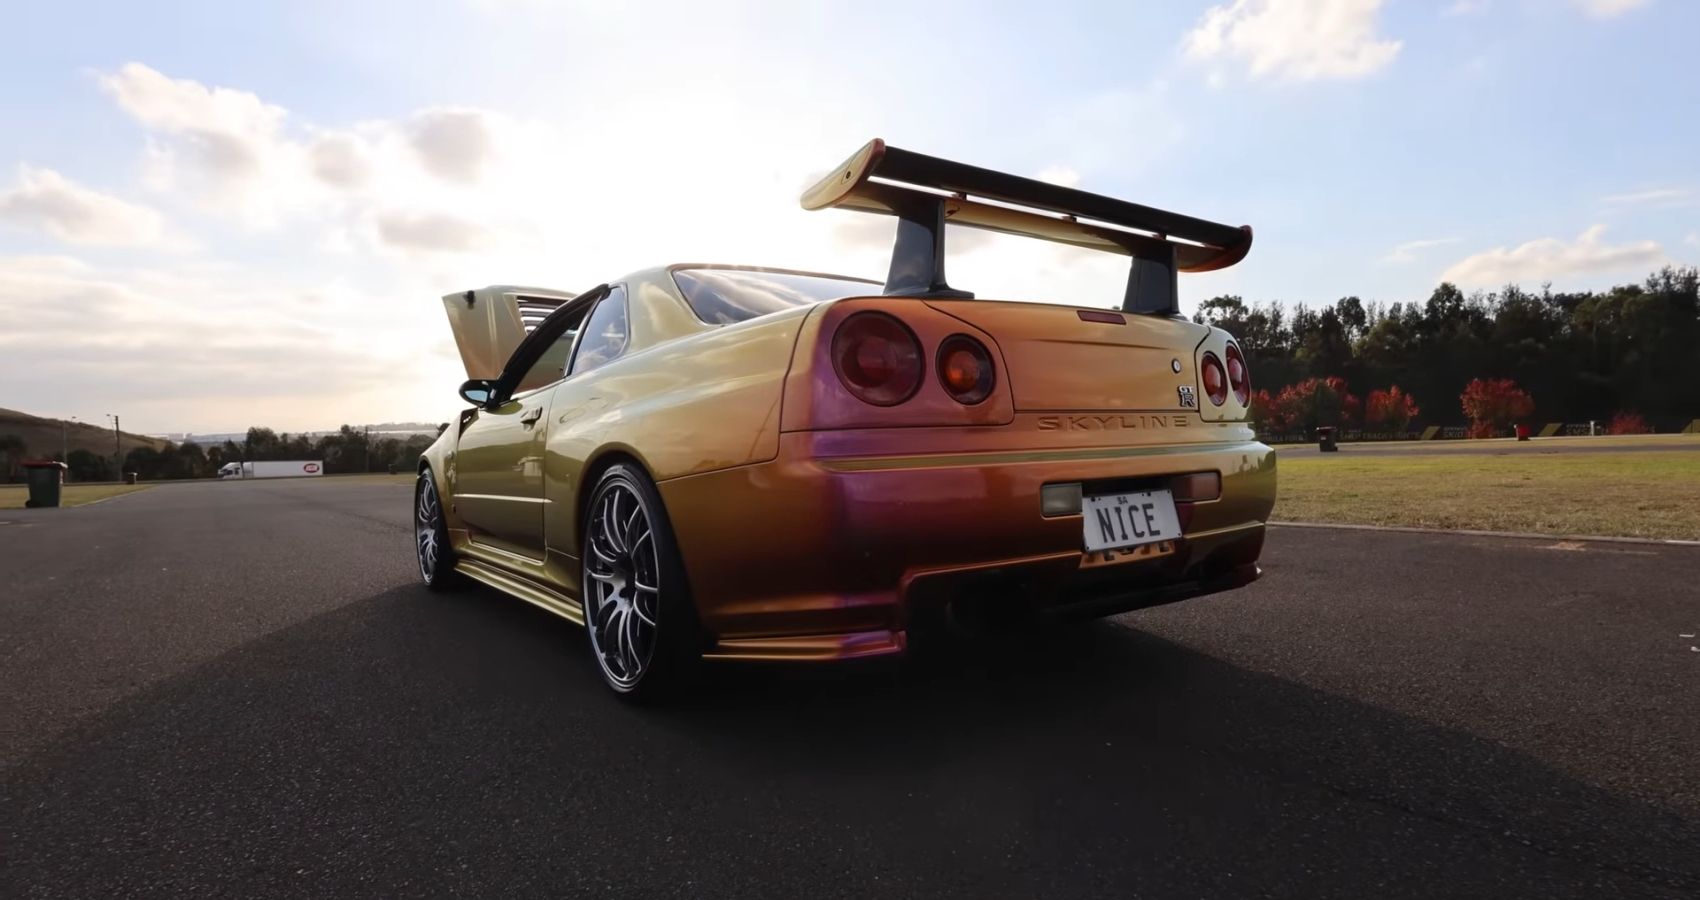 PPG Color Nissan R34 GT-R rear view low down